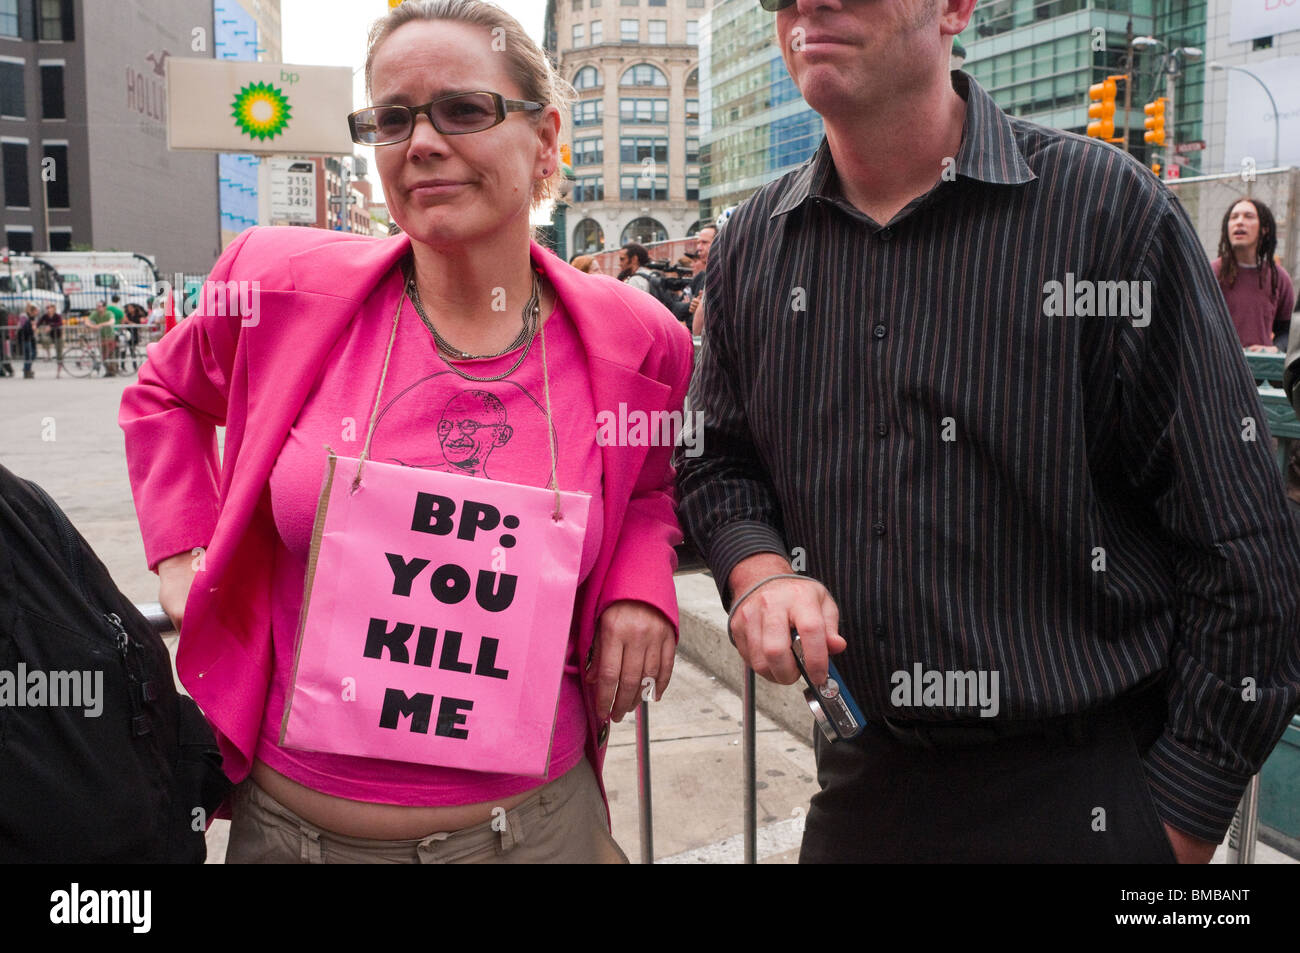 New York, NY Code Pink activists protest BP oil spill ©Stacy Walsh Rosenstock/Alamy Stock Photo